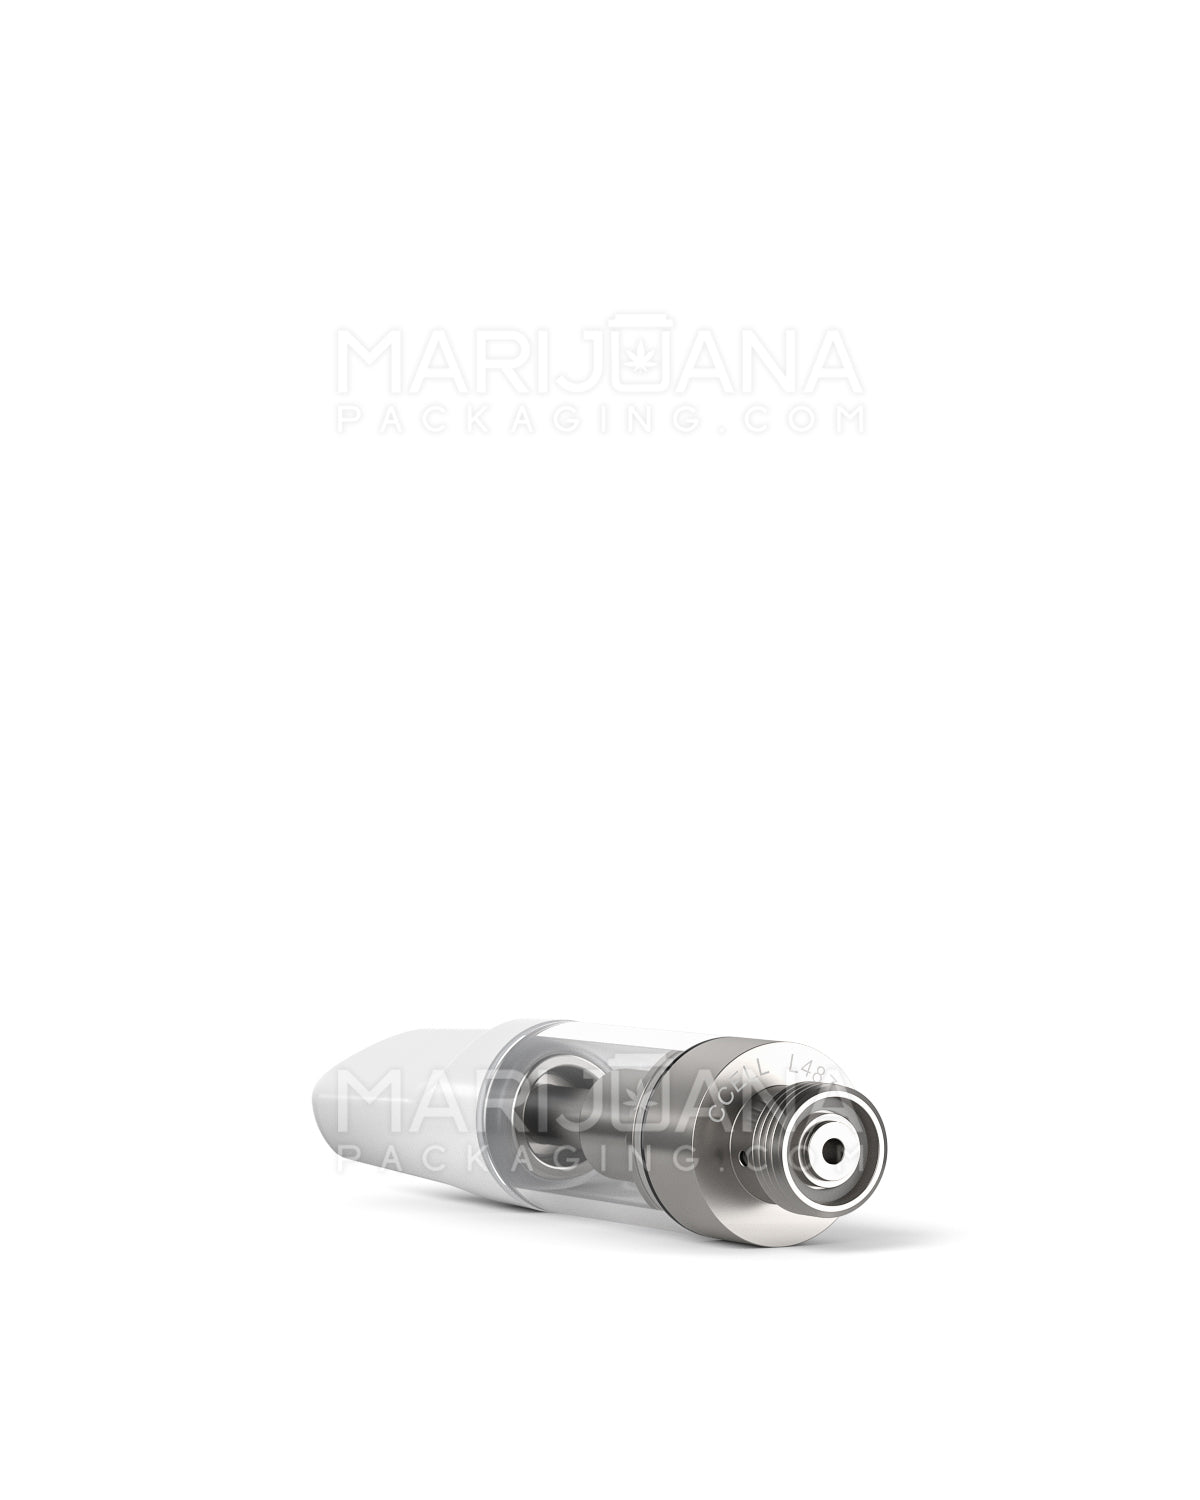 CCELL | Liquid6 Reactor Glass Vape Cartridge with White Ceramic Mouthpiece | 0.5mL - Screw On - 100 Count - 7